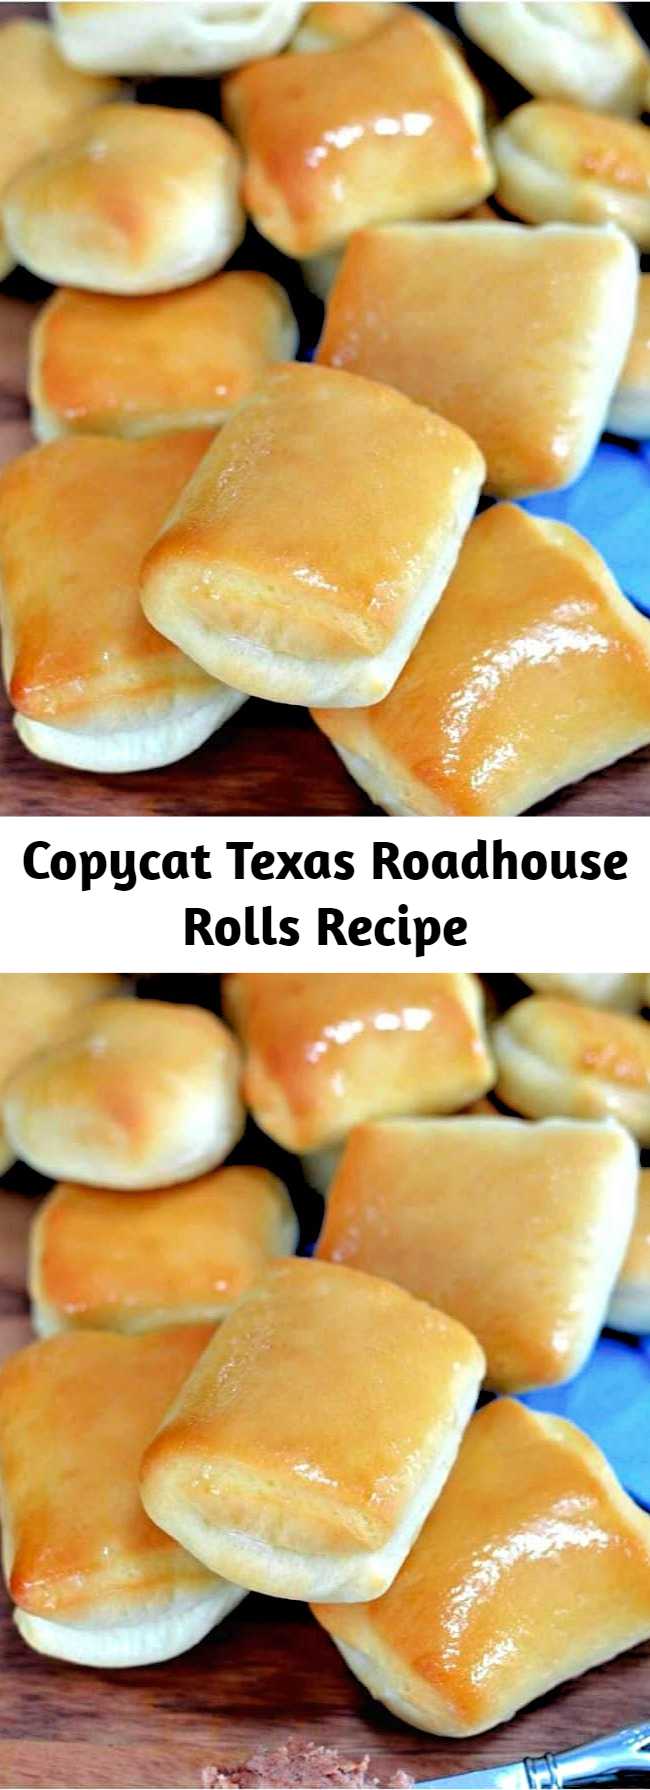 Copycat Texas Roadhouse Rolls Recipe - These Copycat Texas Roadhouse Rolls are brushed with sweet honey butter and can be made in a bread machine or by hand! A perfect side dish idea for holidays and family dinners! #rolls #easy #texasroadhouse #bread #sidedish #sides #copycatrecipes #copycatrecipe